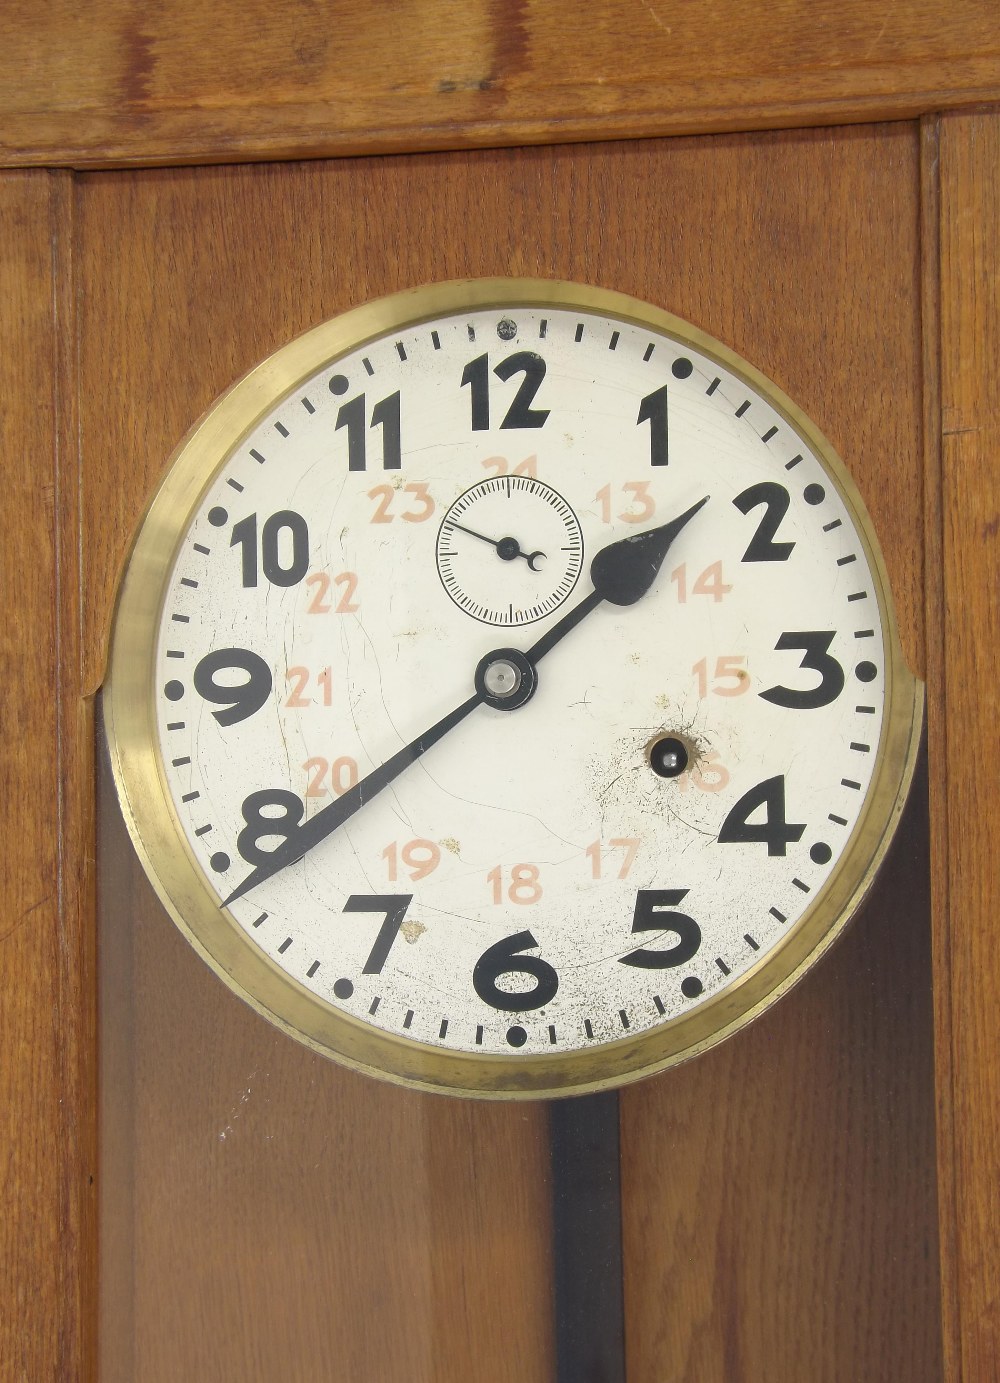 Two C. Theod. Wagner mechanical wall clocks with provision for contacts to operate electrical slaves - Image 5 of 5